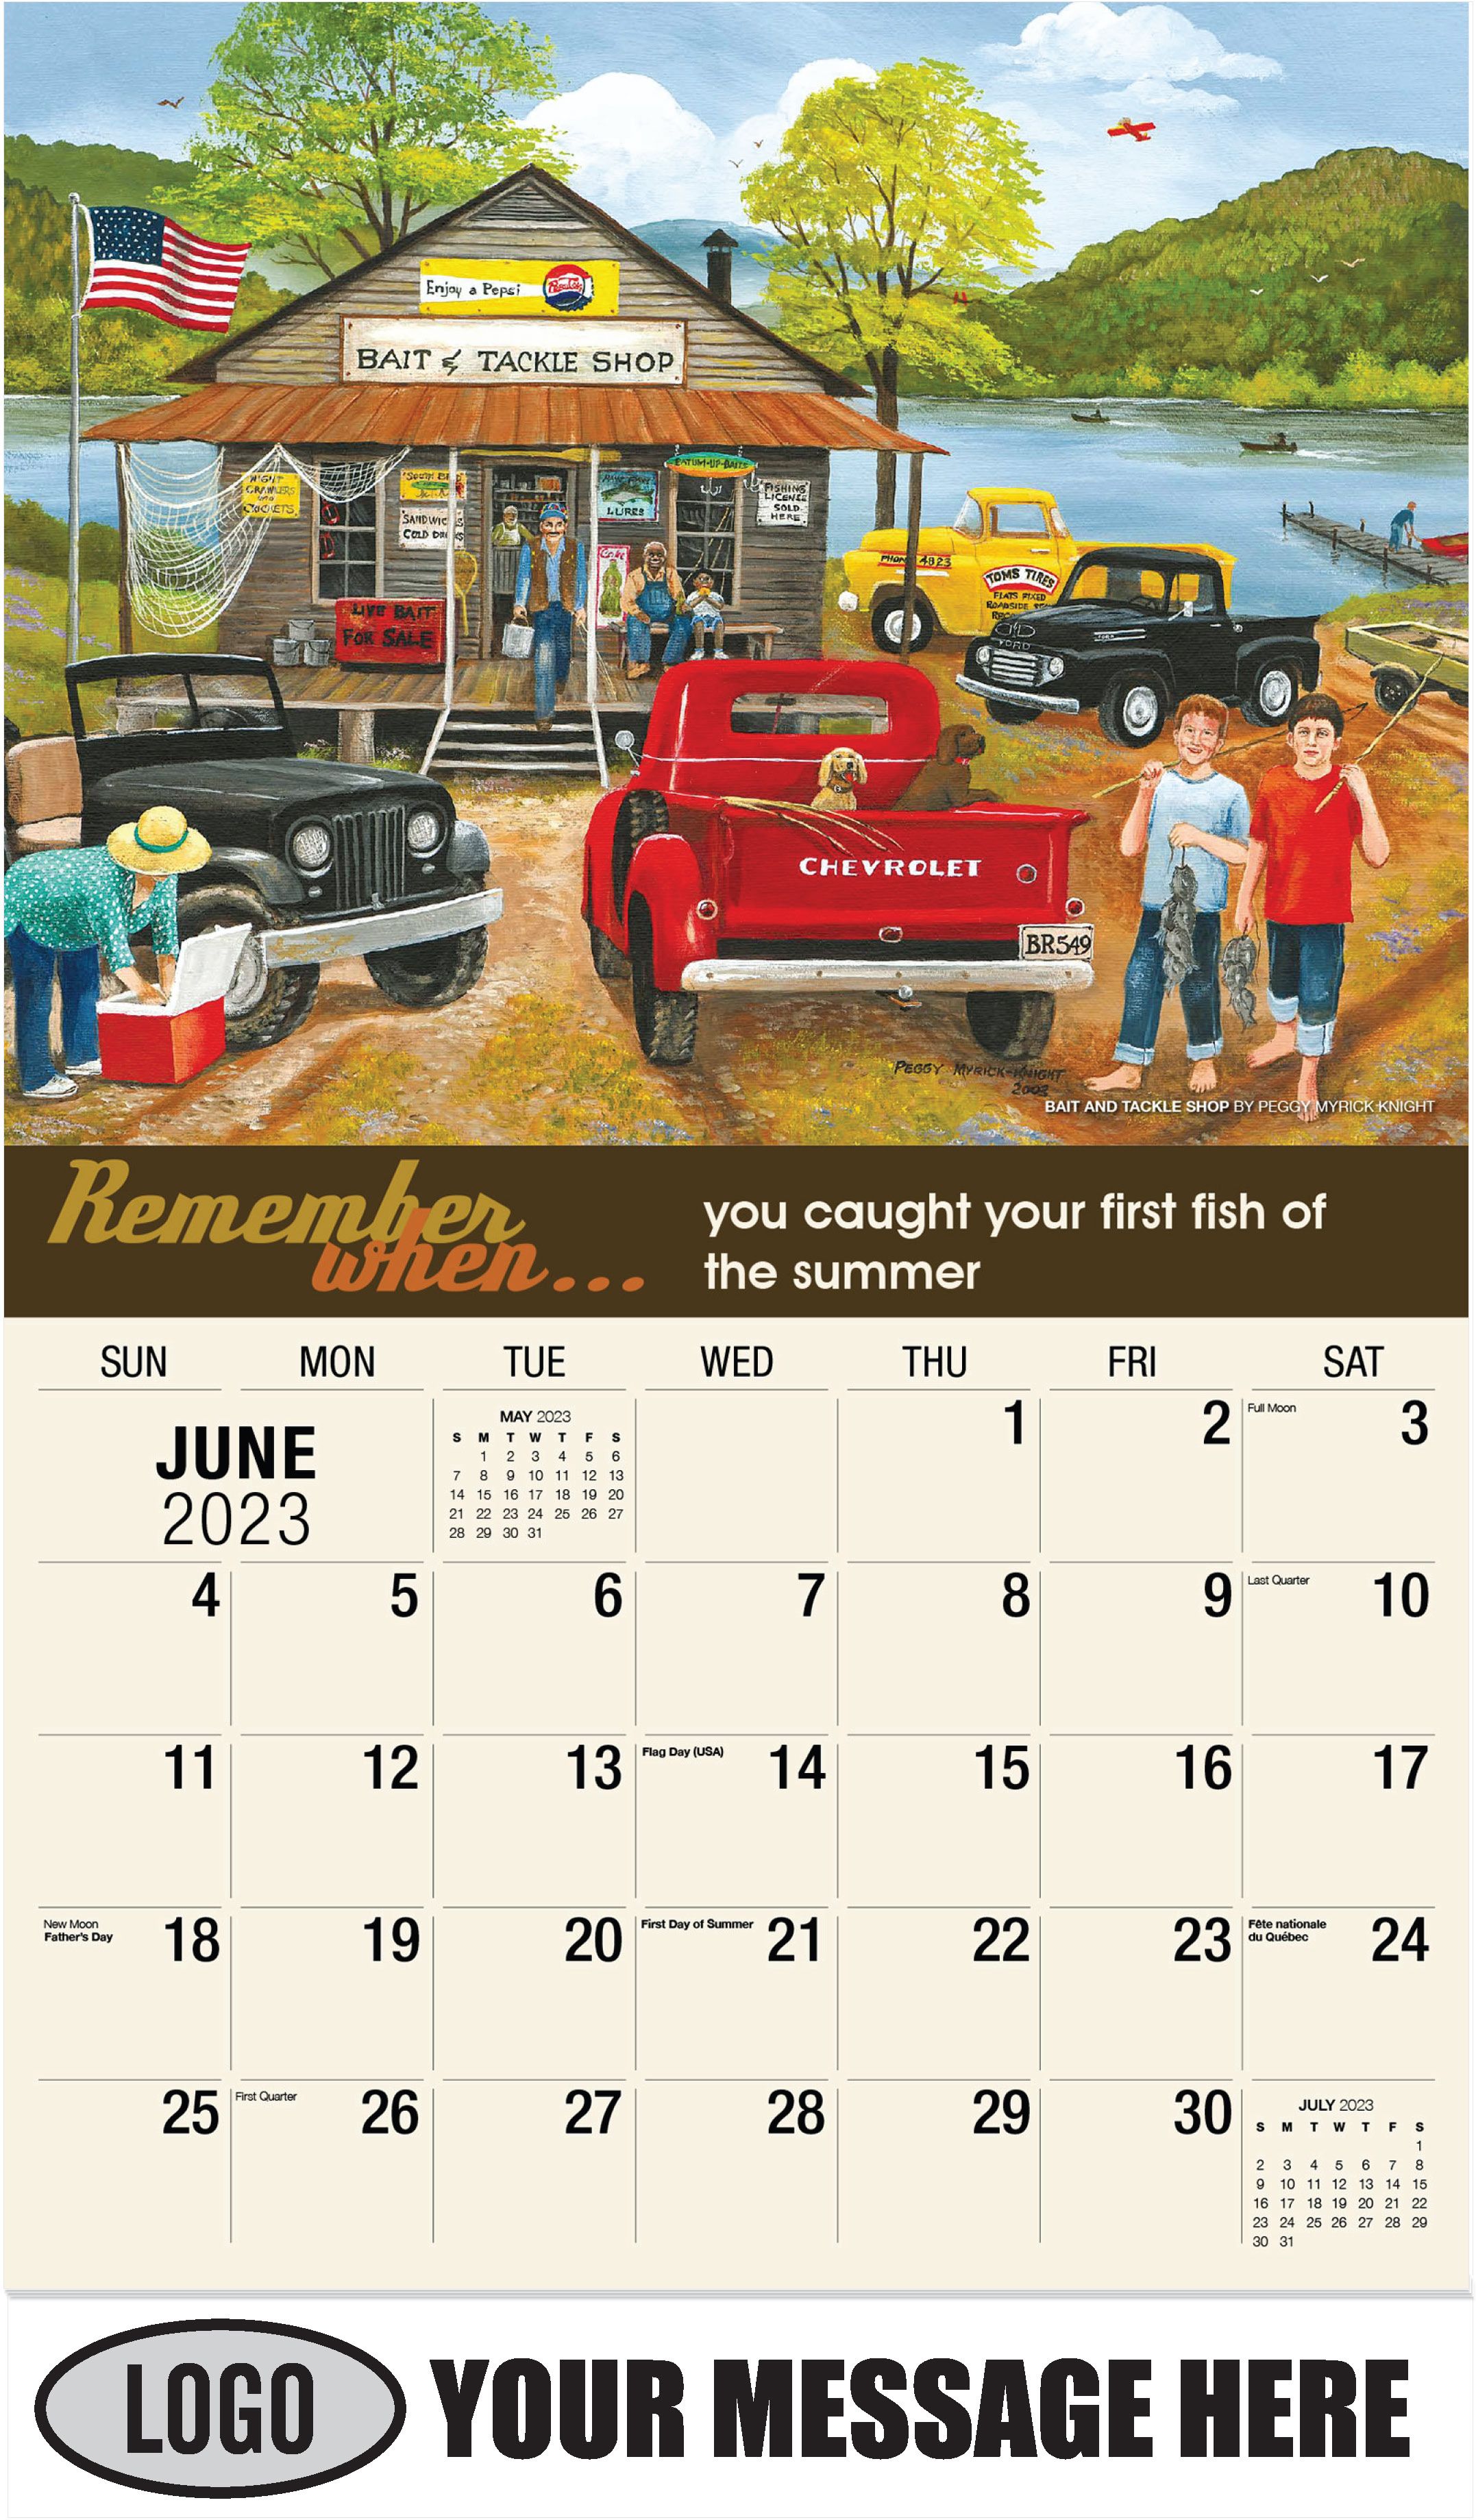 Bait And Tackle Shop by Peggy Myrick Knight - June - Remember When 2023 Promotional Calendar